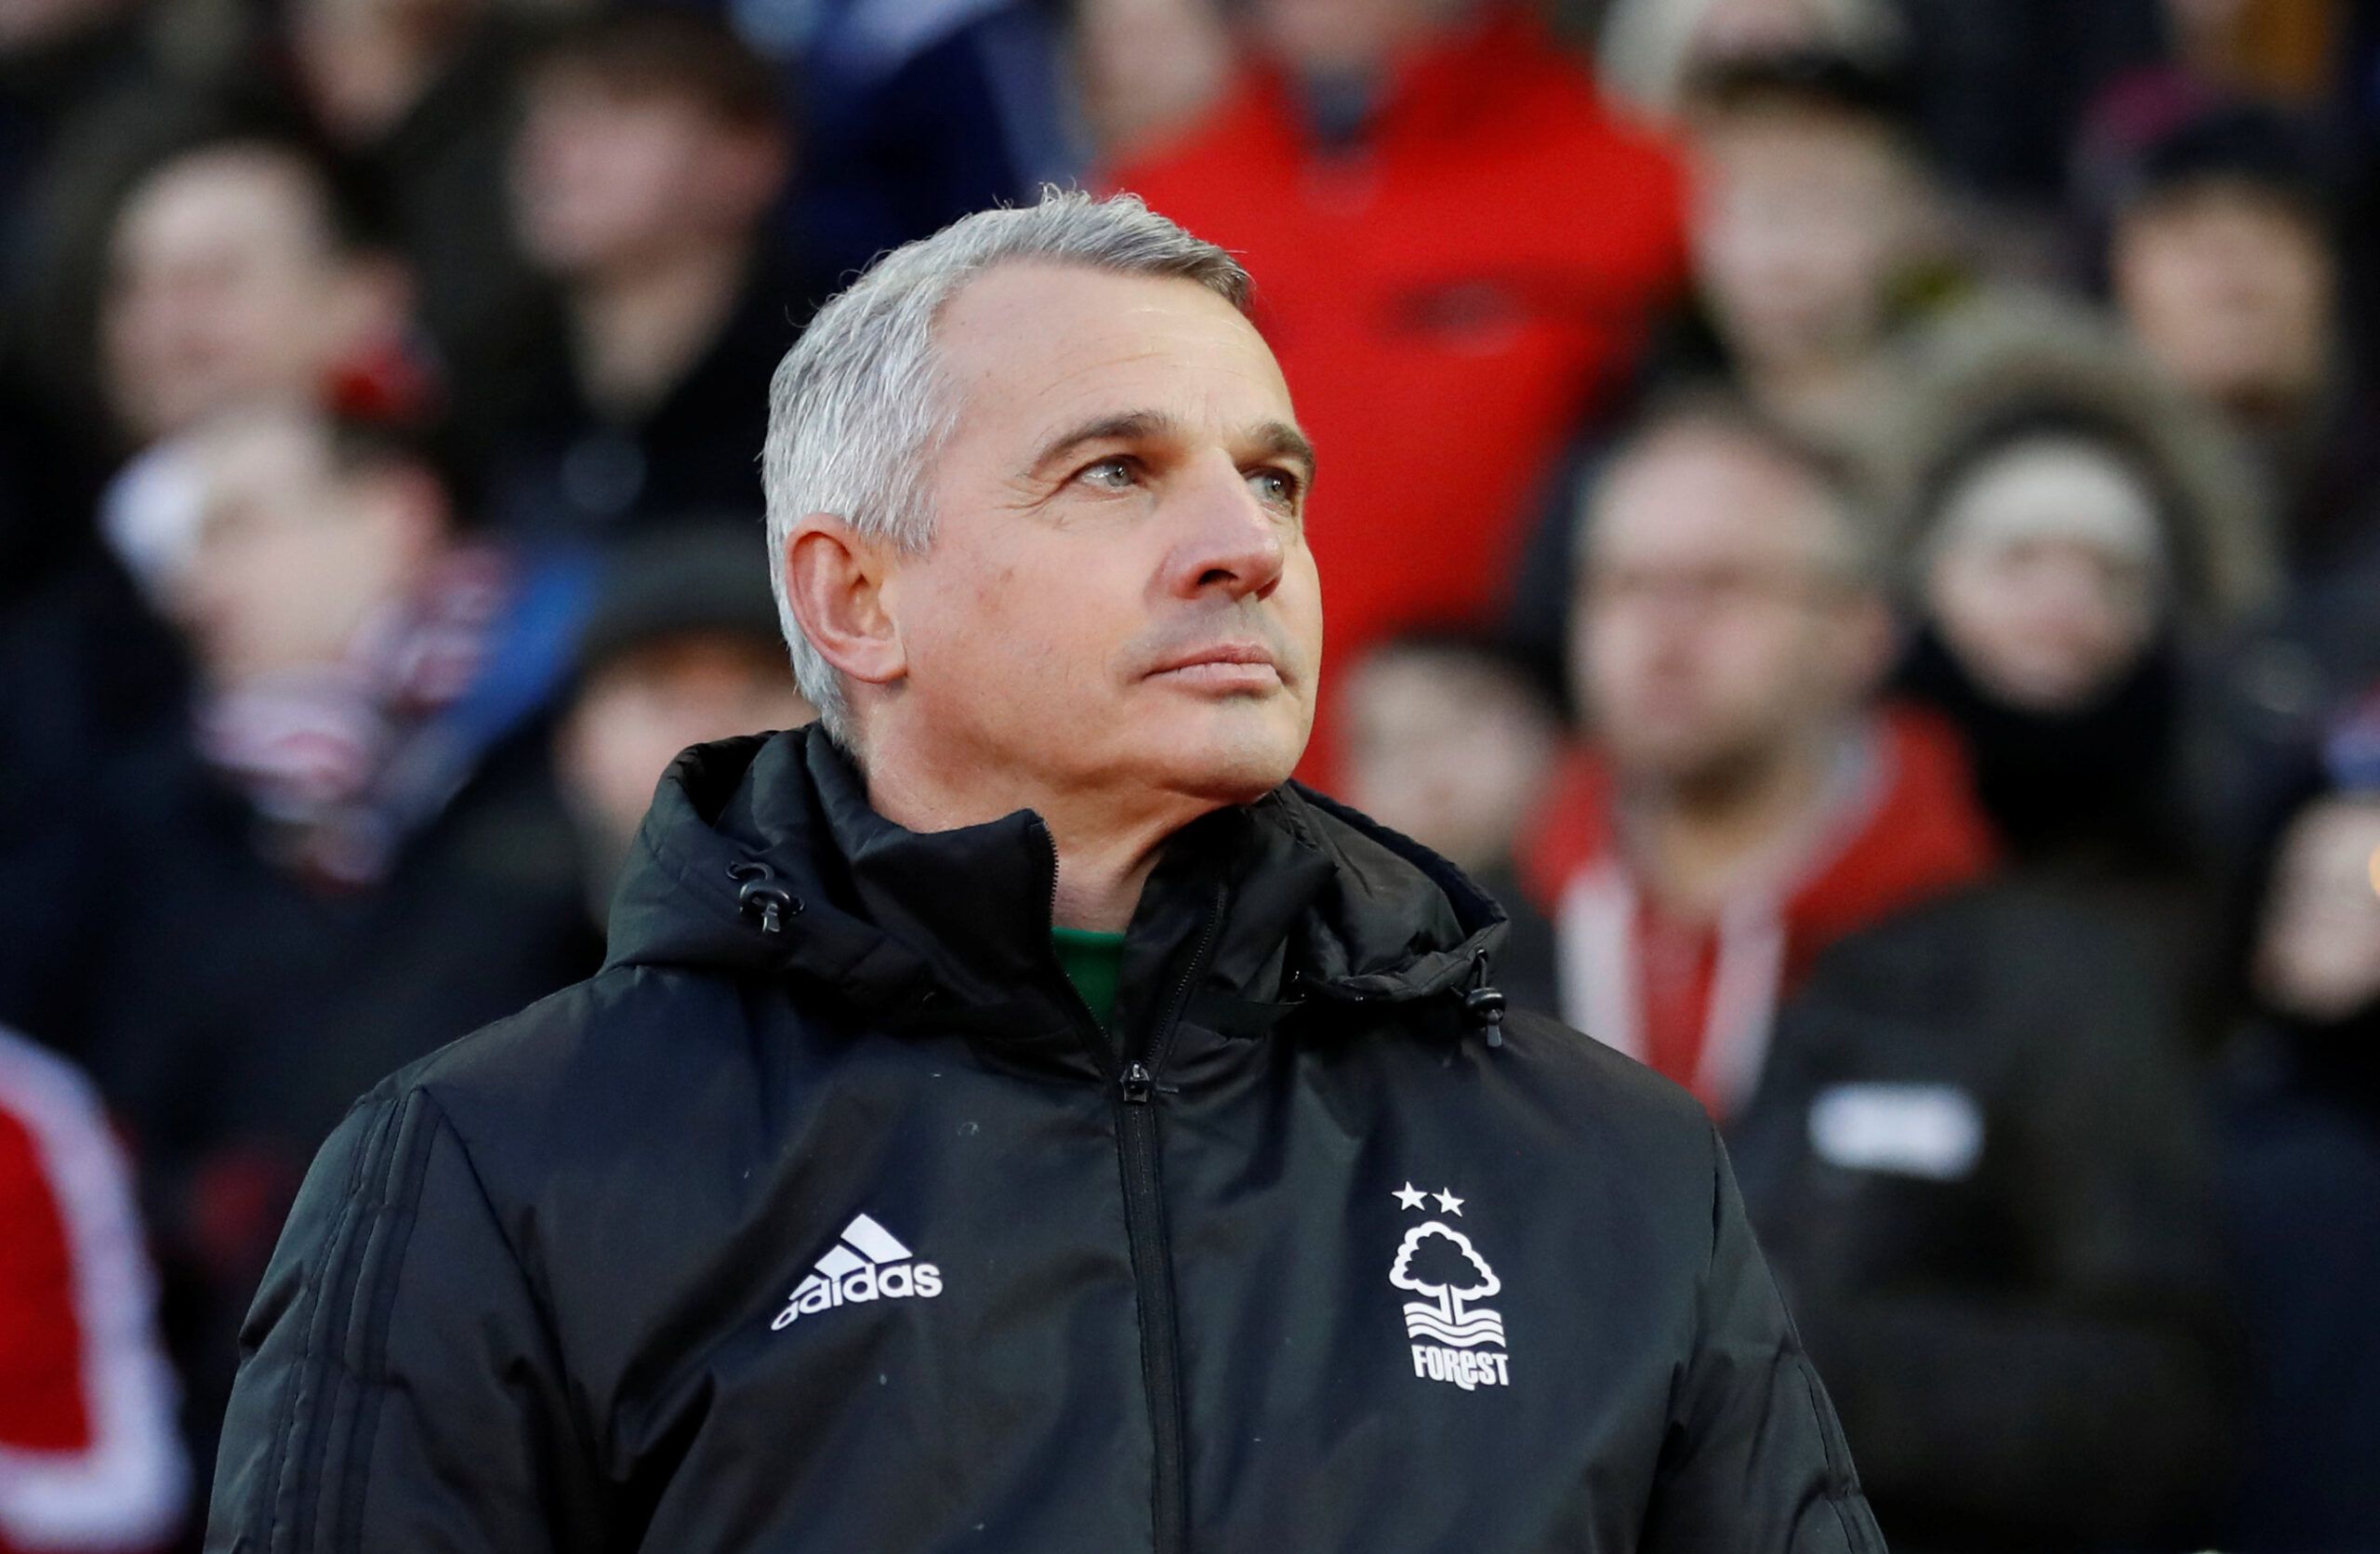 Soccer Football - FA Cup Third Round - Nottingham Forest vs Arsenal - The City Ground, Nottingham, Britain - January 7, 2018   Nottingham Forest caretaker manager Gary Brazil    Action Images via Reuters/Carl Recine